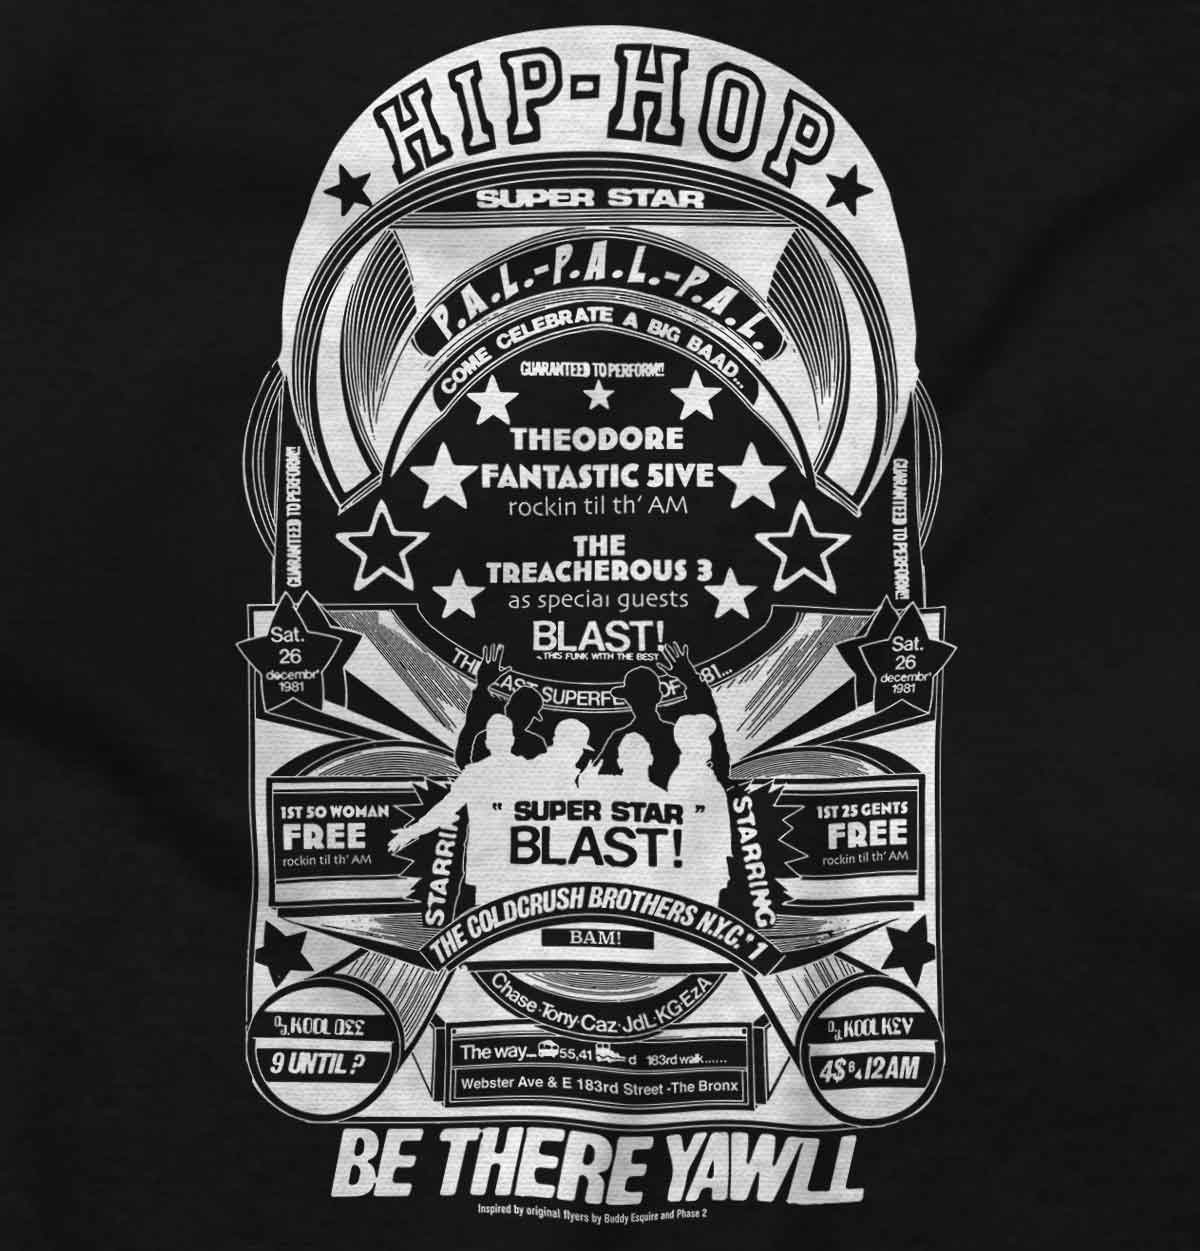 A hip hop poster image from the past with the text "Be There Yawll" and mentions the name of Grand Wizard Theodore.